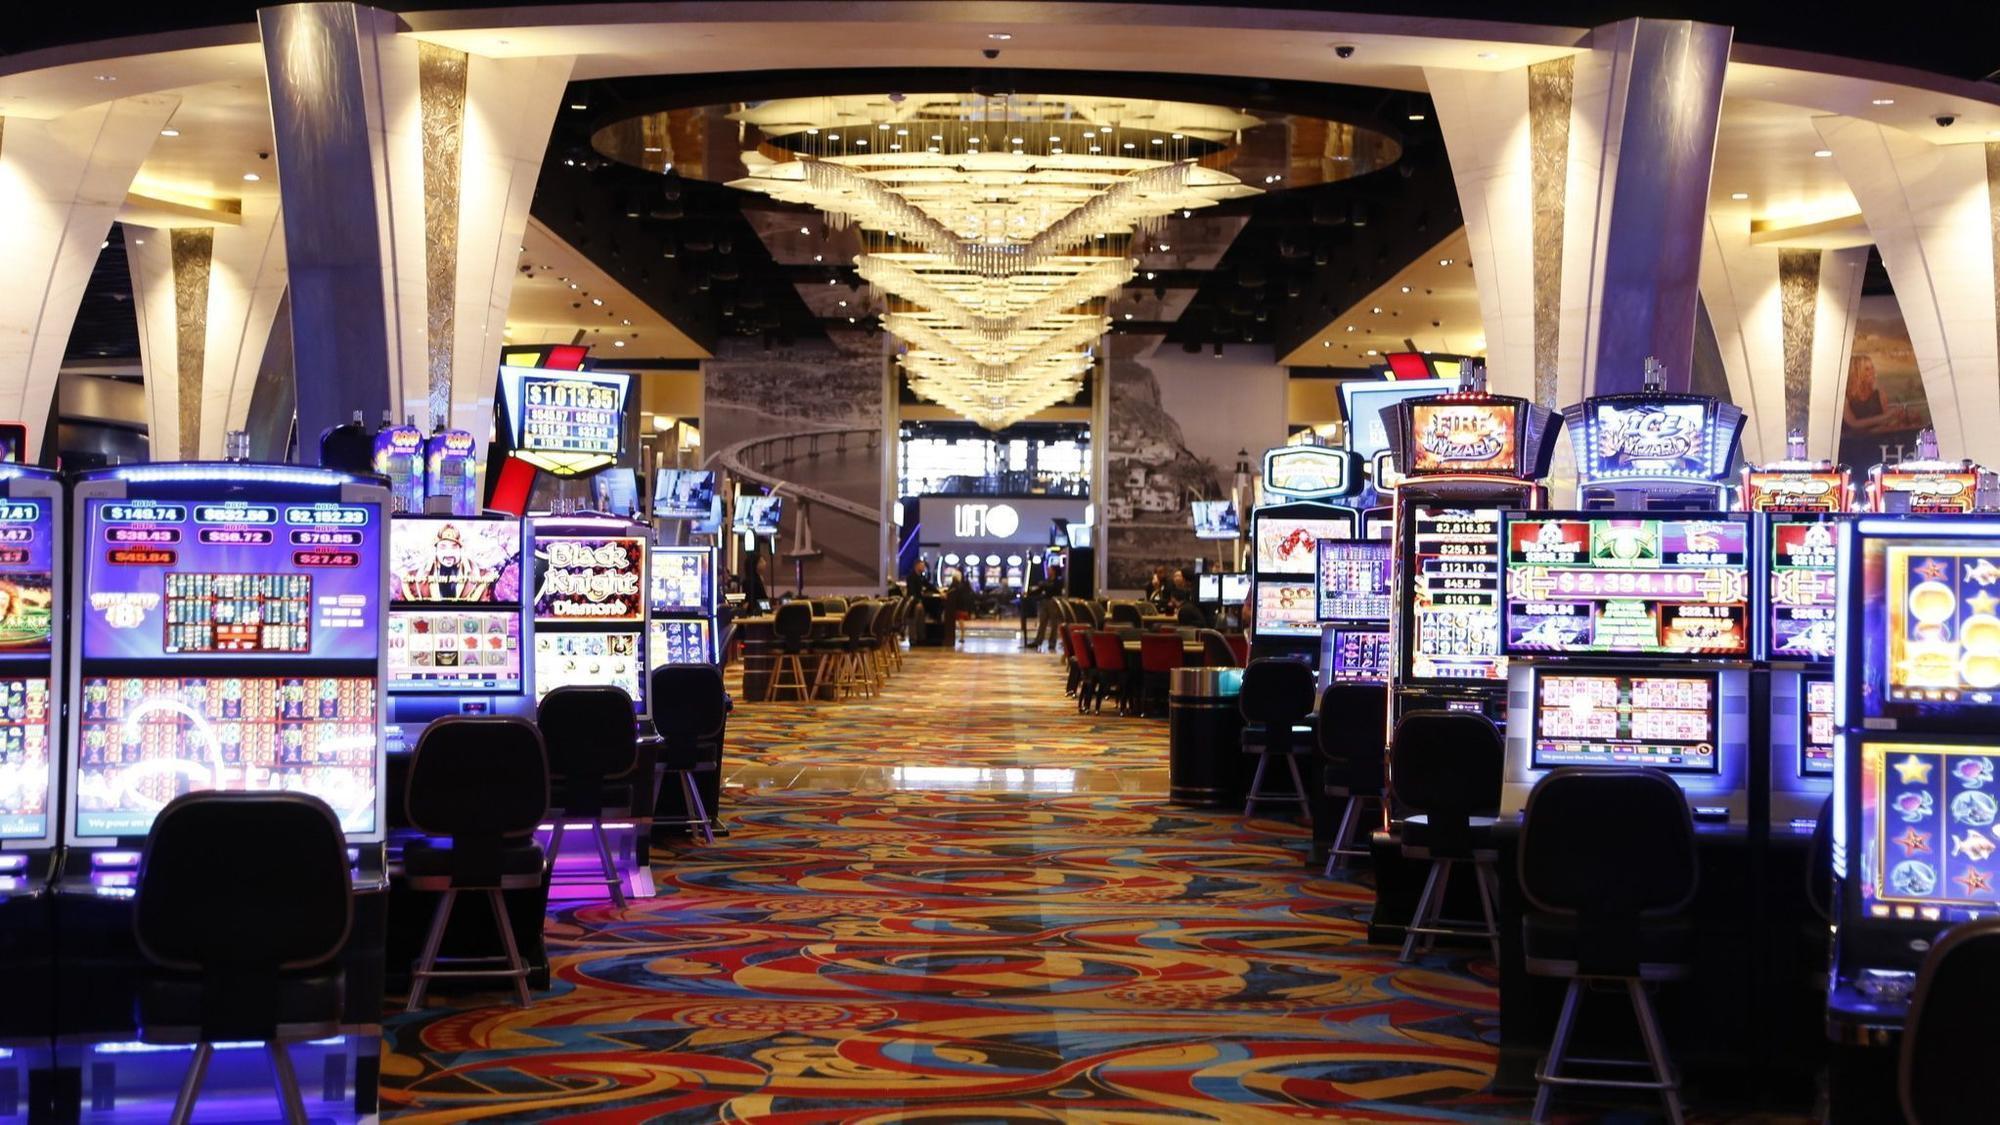 Florida court rules 'pre-reveal' games played in bars are illegal slot machines